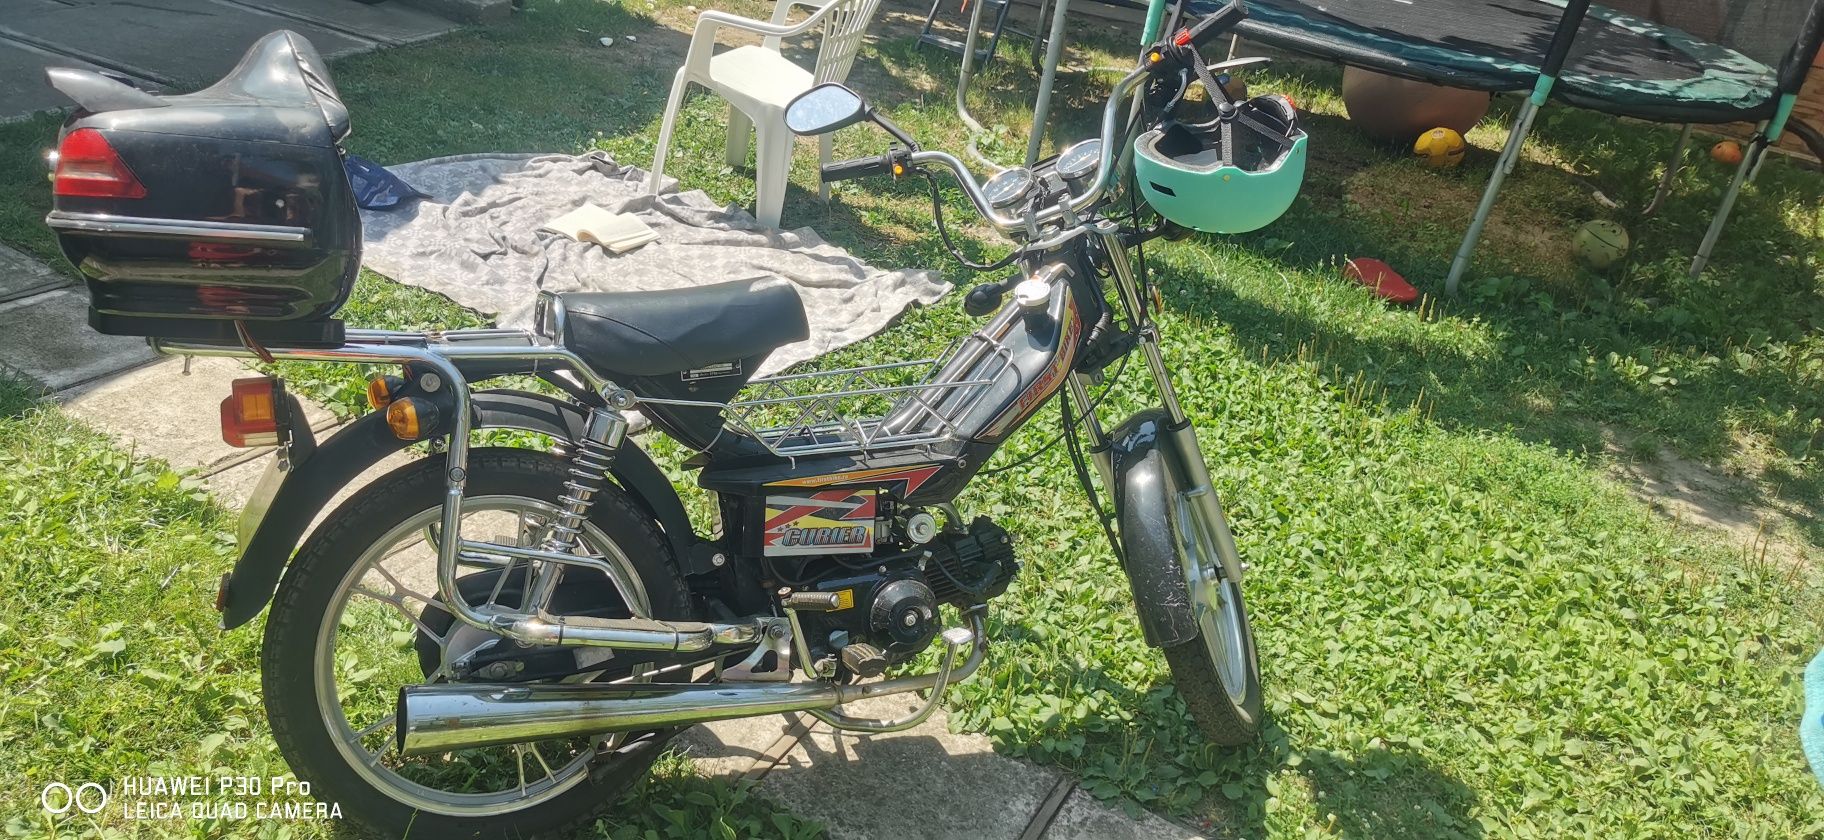 Moped First Bike Curier 50cm